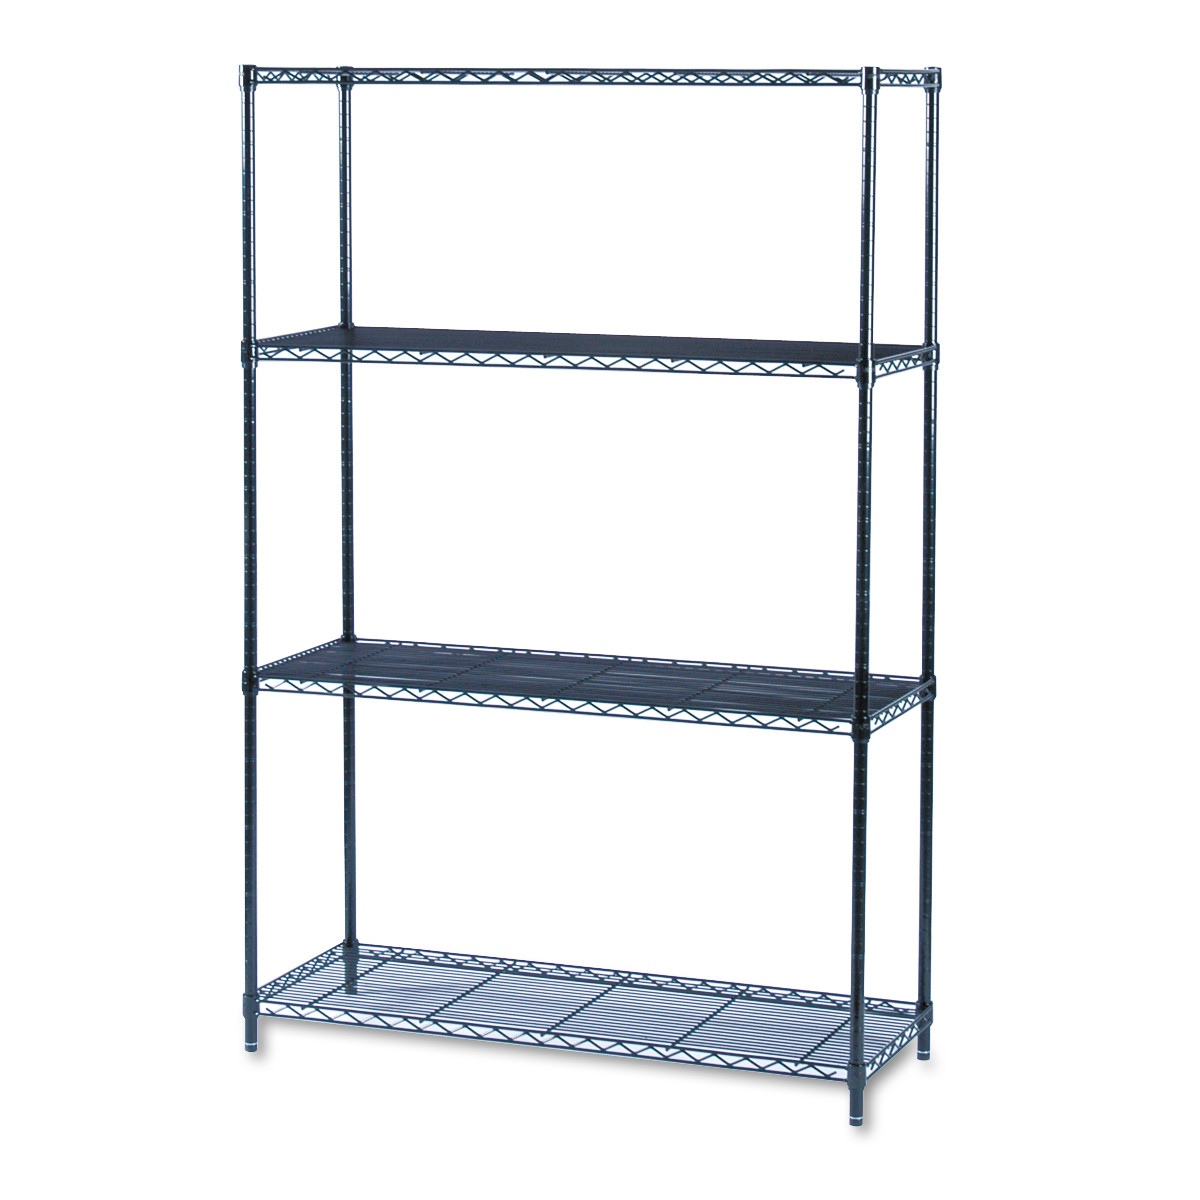 Safco Industrial Wire Shelving Starter Kit, Four-Shelf, 48w x 18d x 72h, Black - image 1 of 4